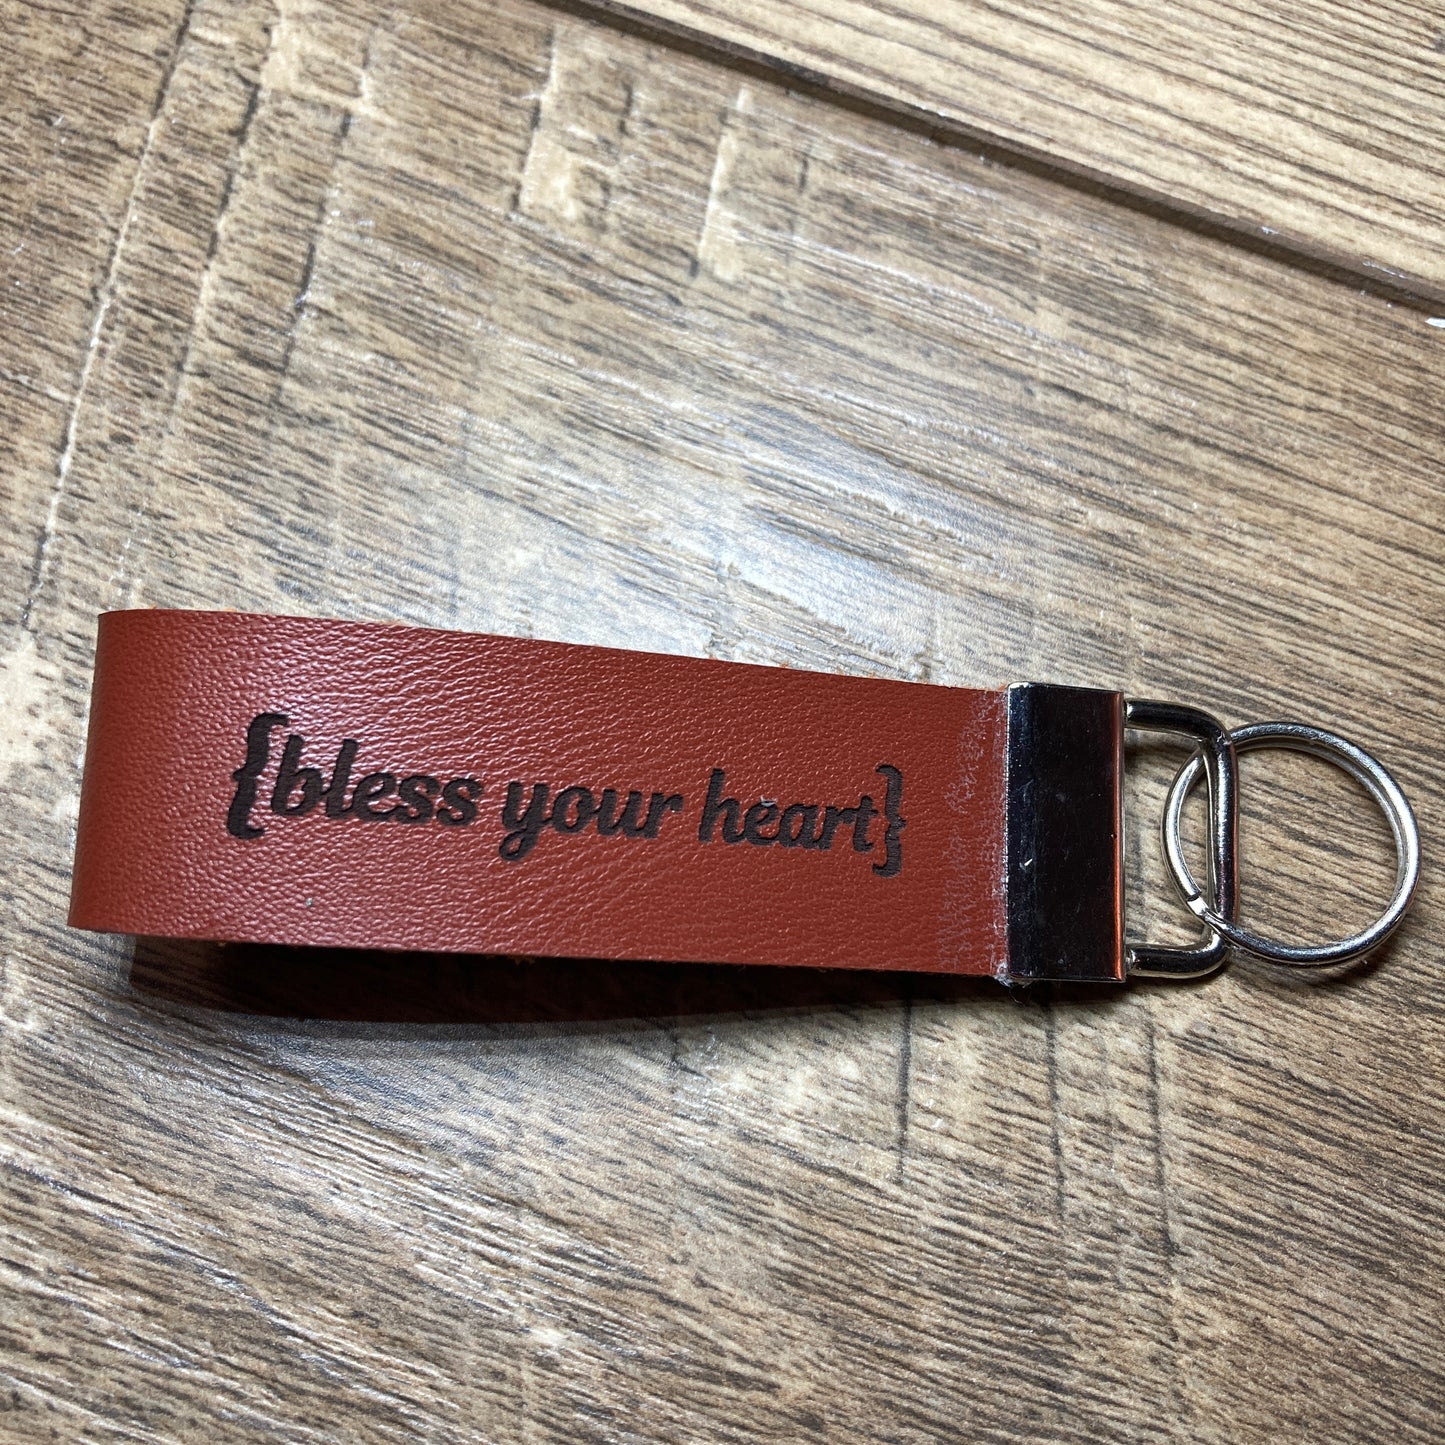 Bless Your Heart Leather Keychain